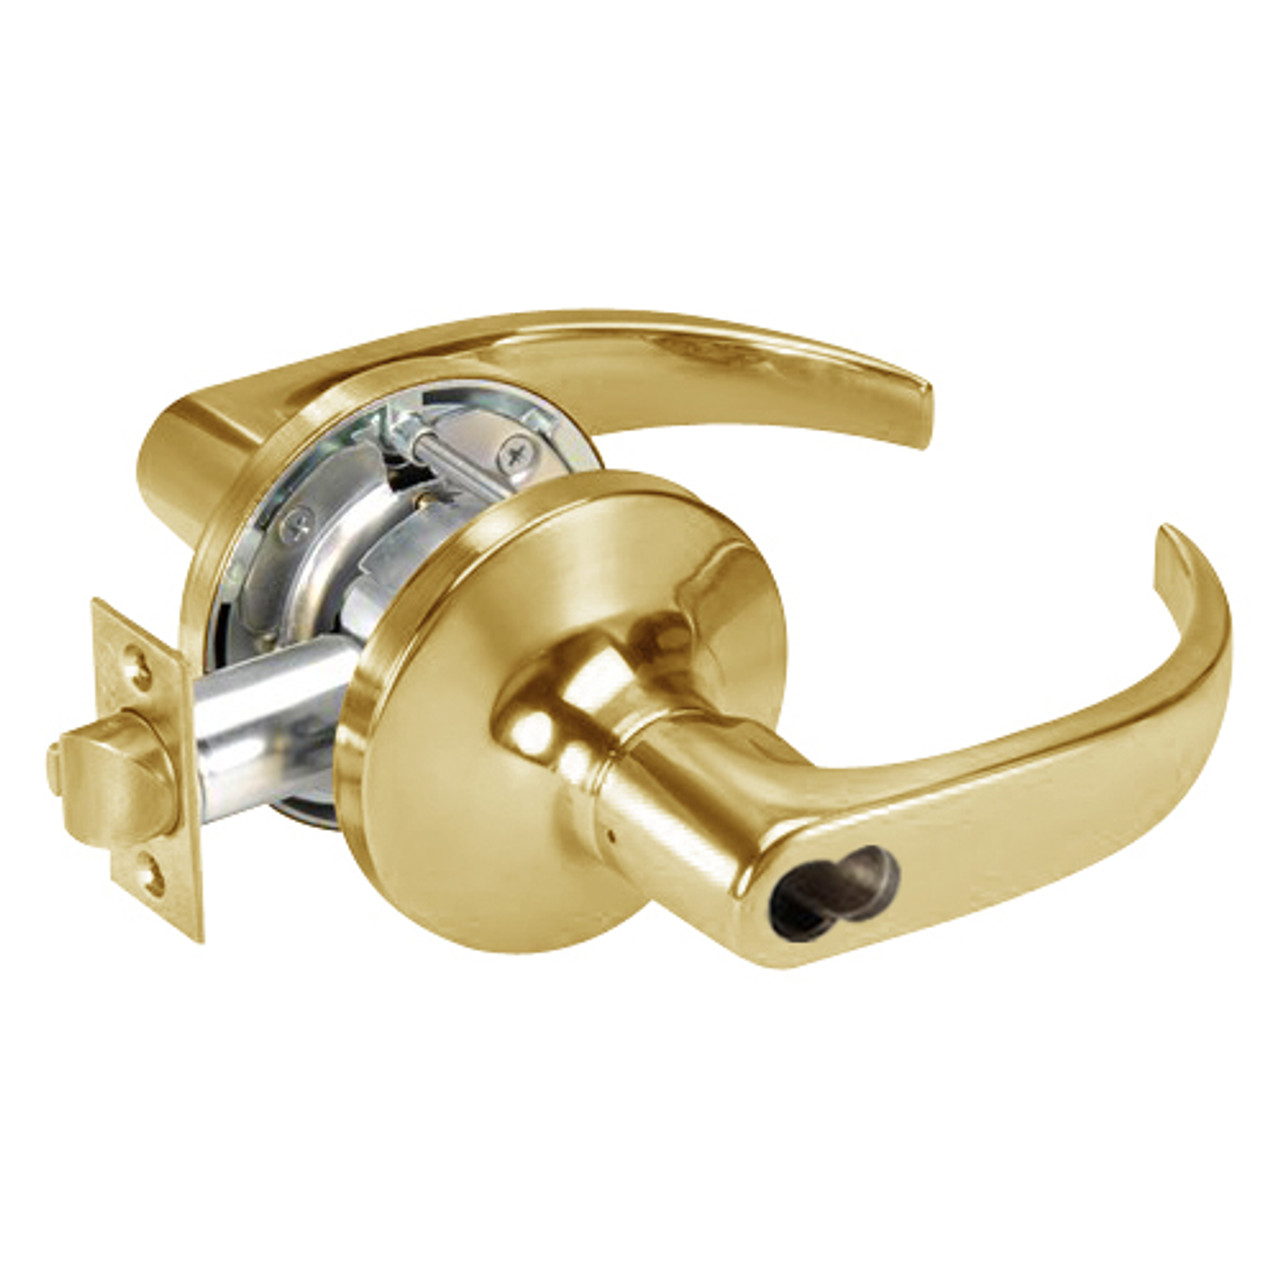 SI-PB5404LN-606 Yale 5400LN Series Single Cylinder Entry Cylindrical Locks with Pacific Beach Lever Prepped for Schlage IC Core in Satin Brass